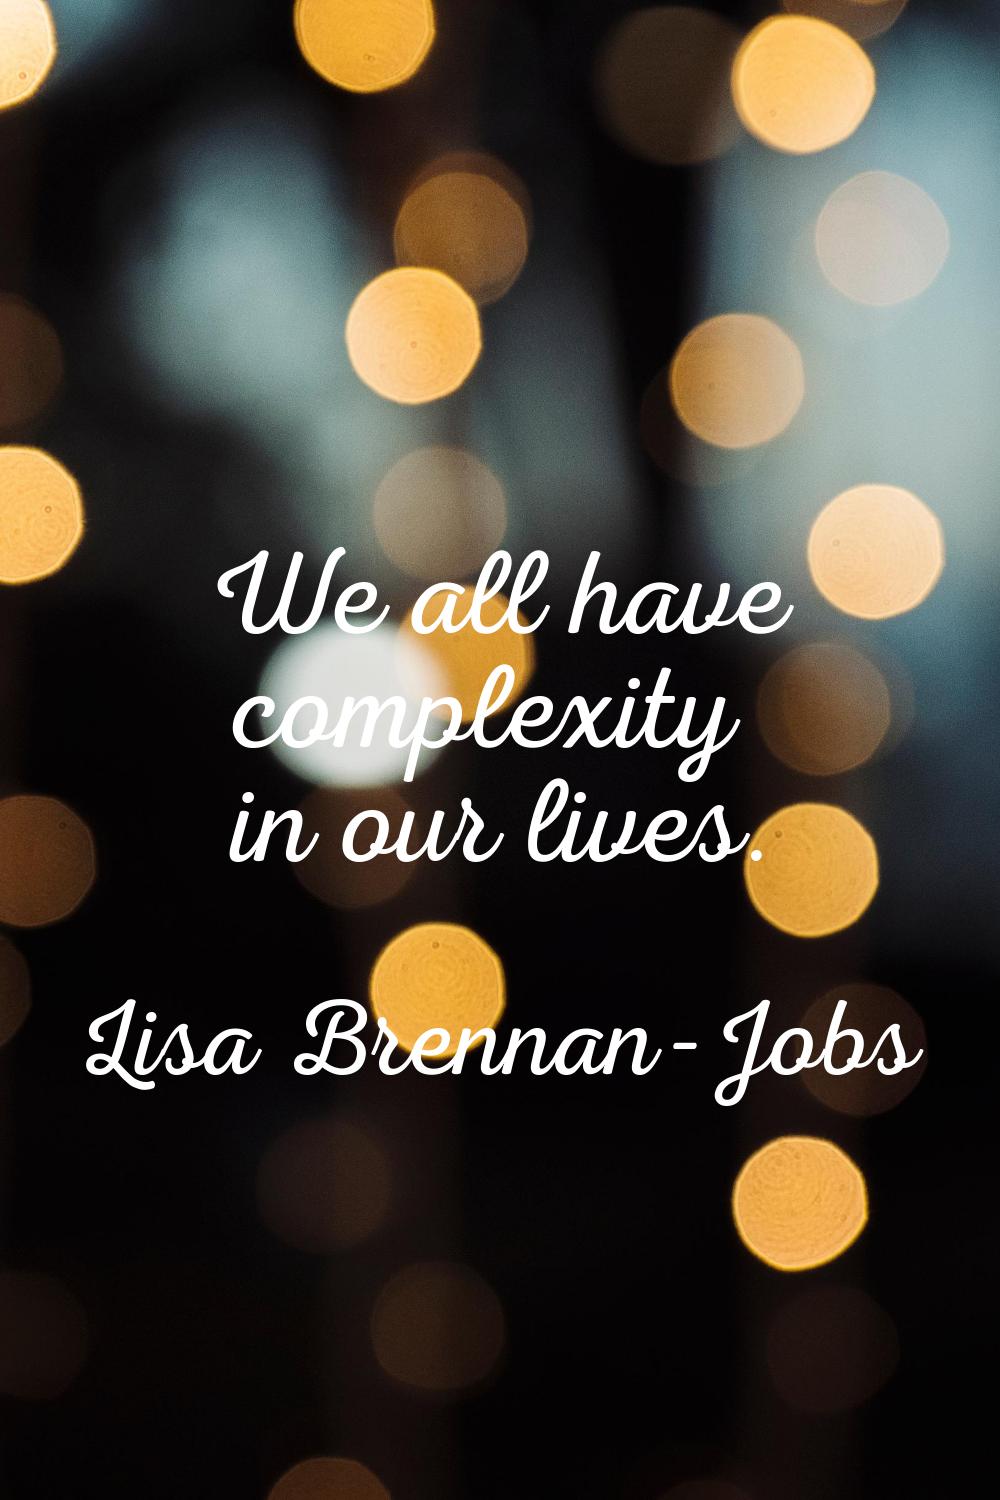 We all have complexity in our lives.